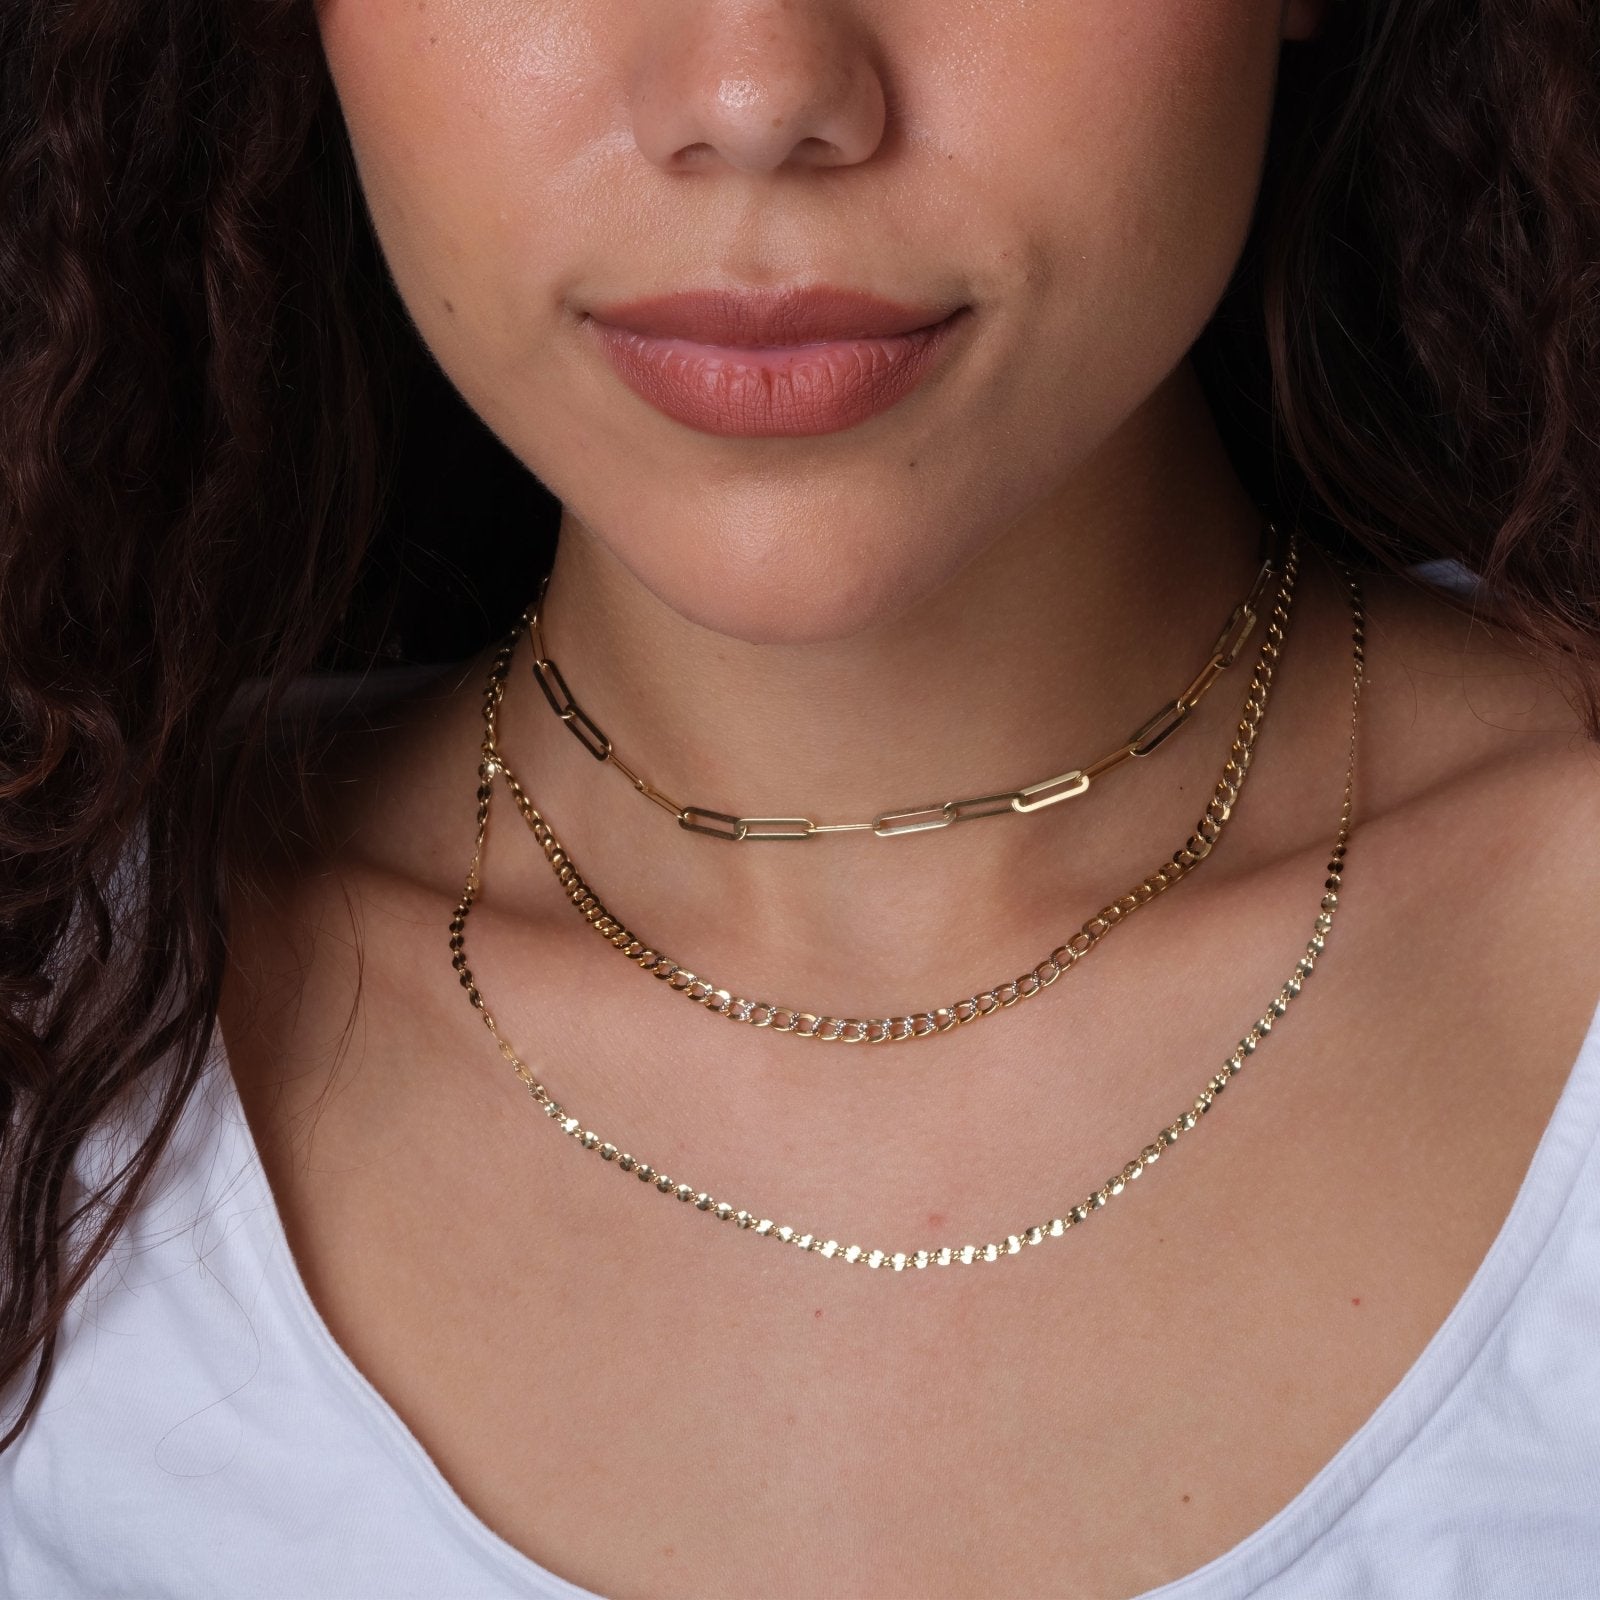 Classic Mirror Chain Necklace in Solid 10k Yellow Gold Necklaces Estella Collection #product_description# 10k 14k Layering Necklace #tag4# #tag5# #tag6# #tag7# #tag8# #tag9# #tag10#